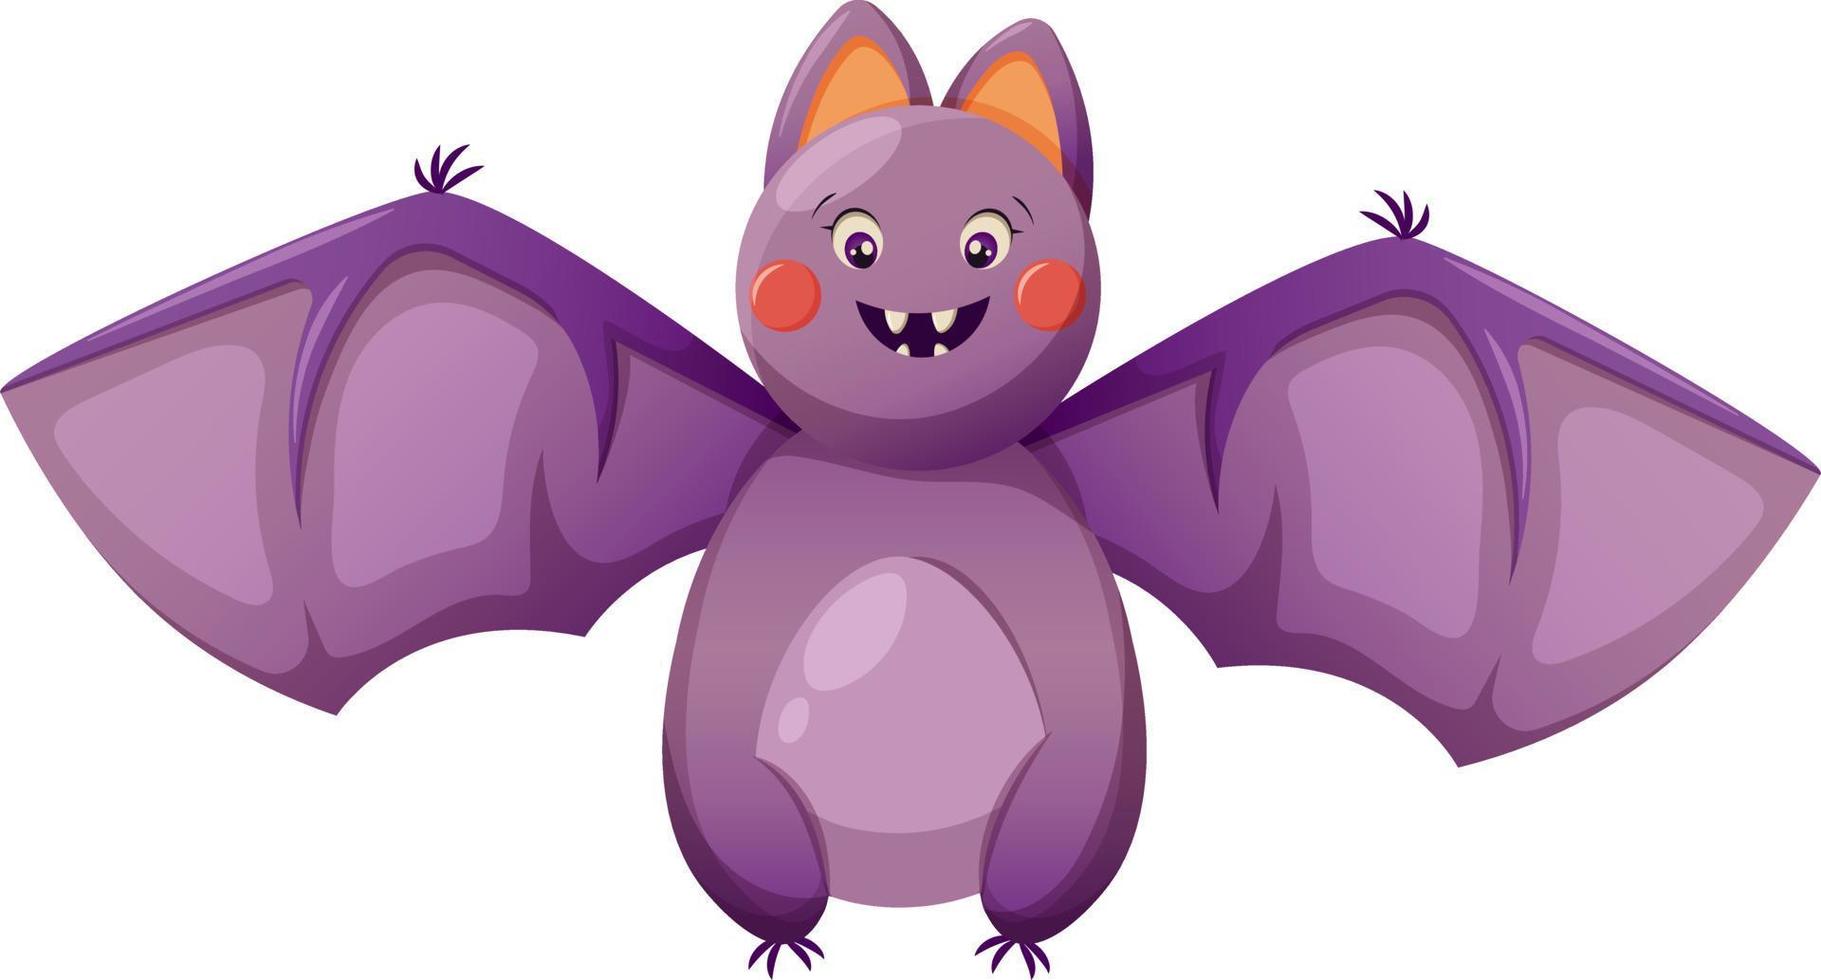 Cute bat for kids Halloween isolated vector